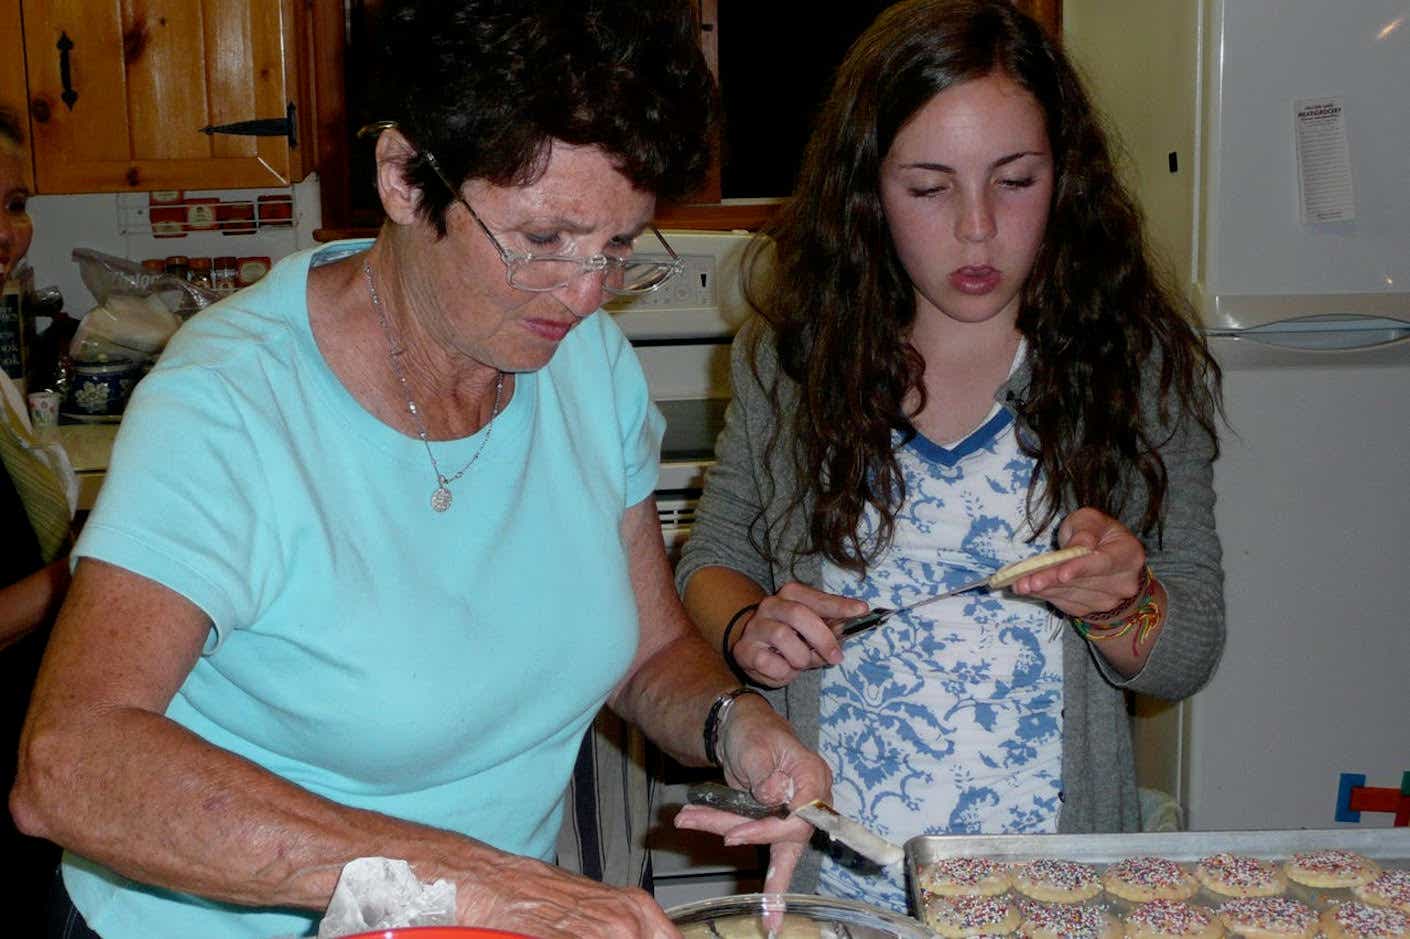 Mondry's mother and daughter make cookies.